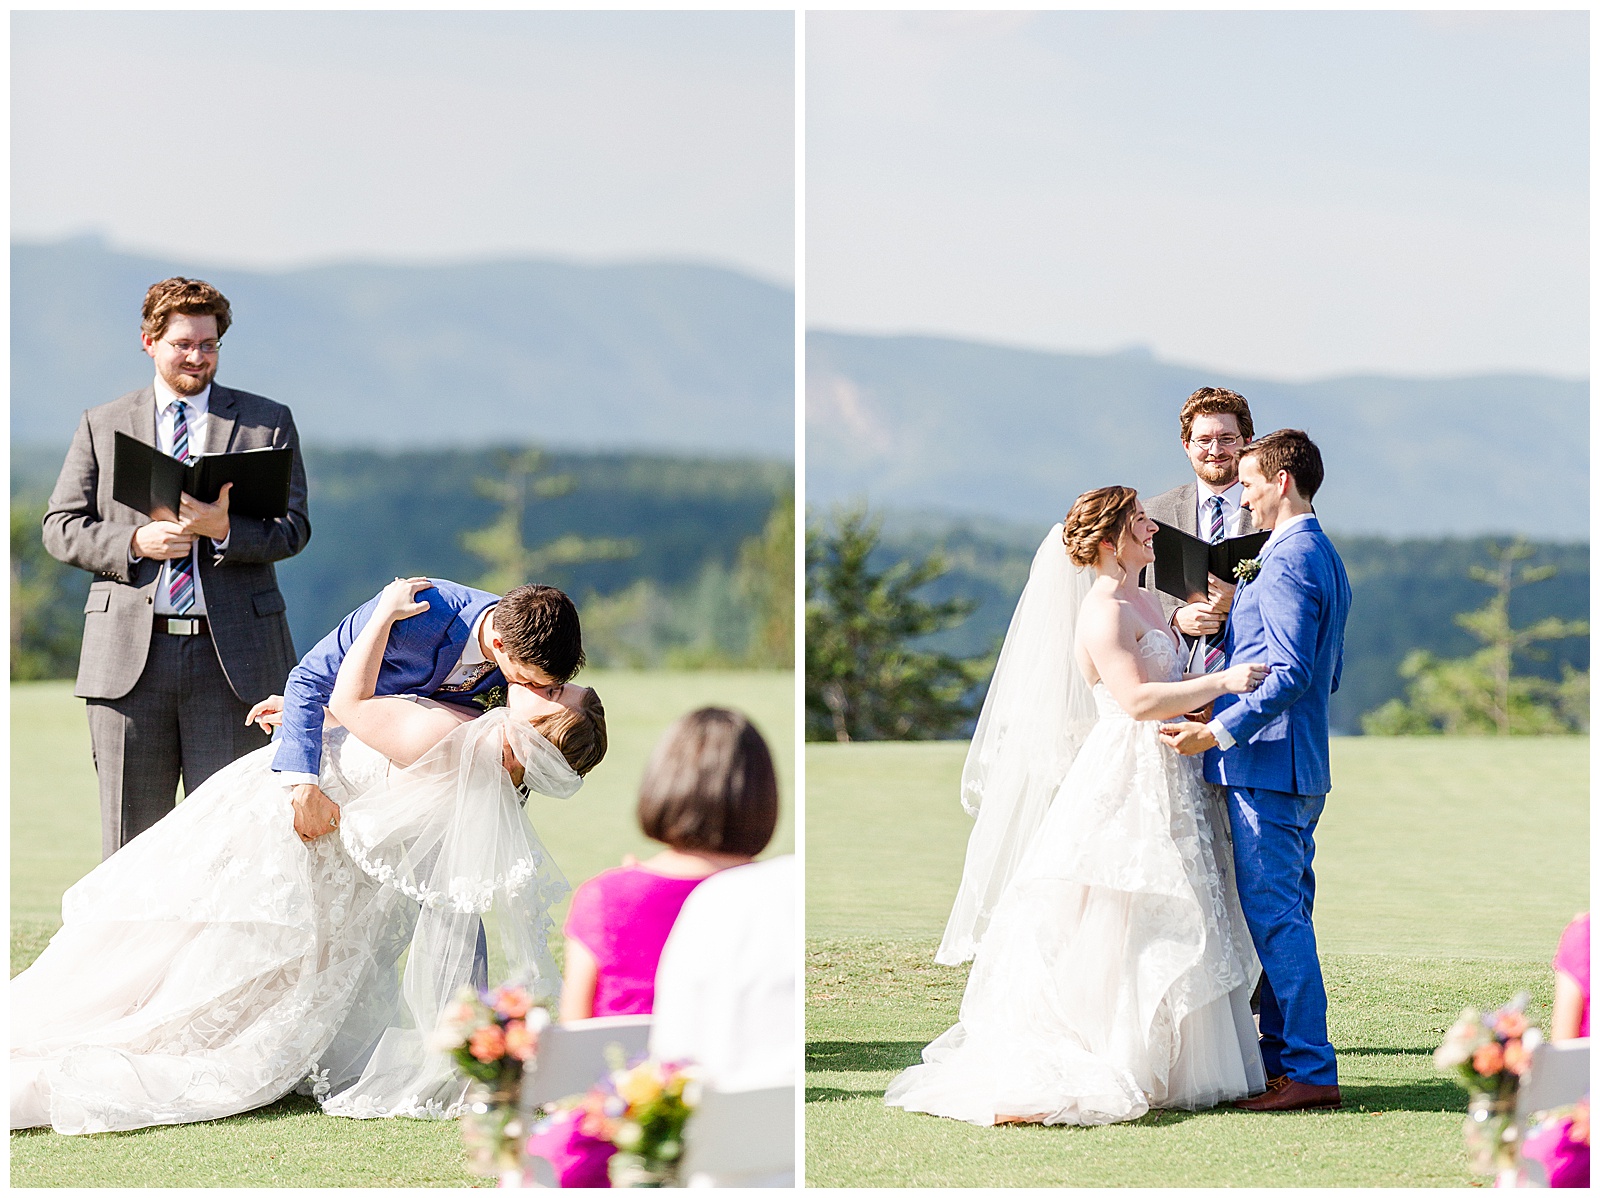 Bride and groom first kiss during ceremony in Outdoorsy Summer Wedding at North Carolina Lakehouse in the Mountains | check out the full wedding at KevynDixonPhoto.com